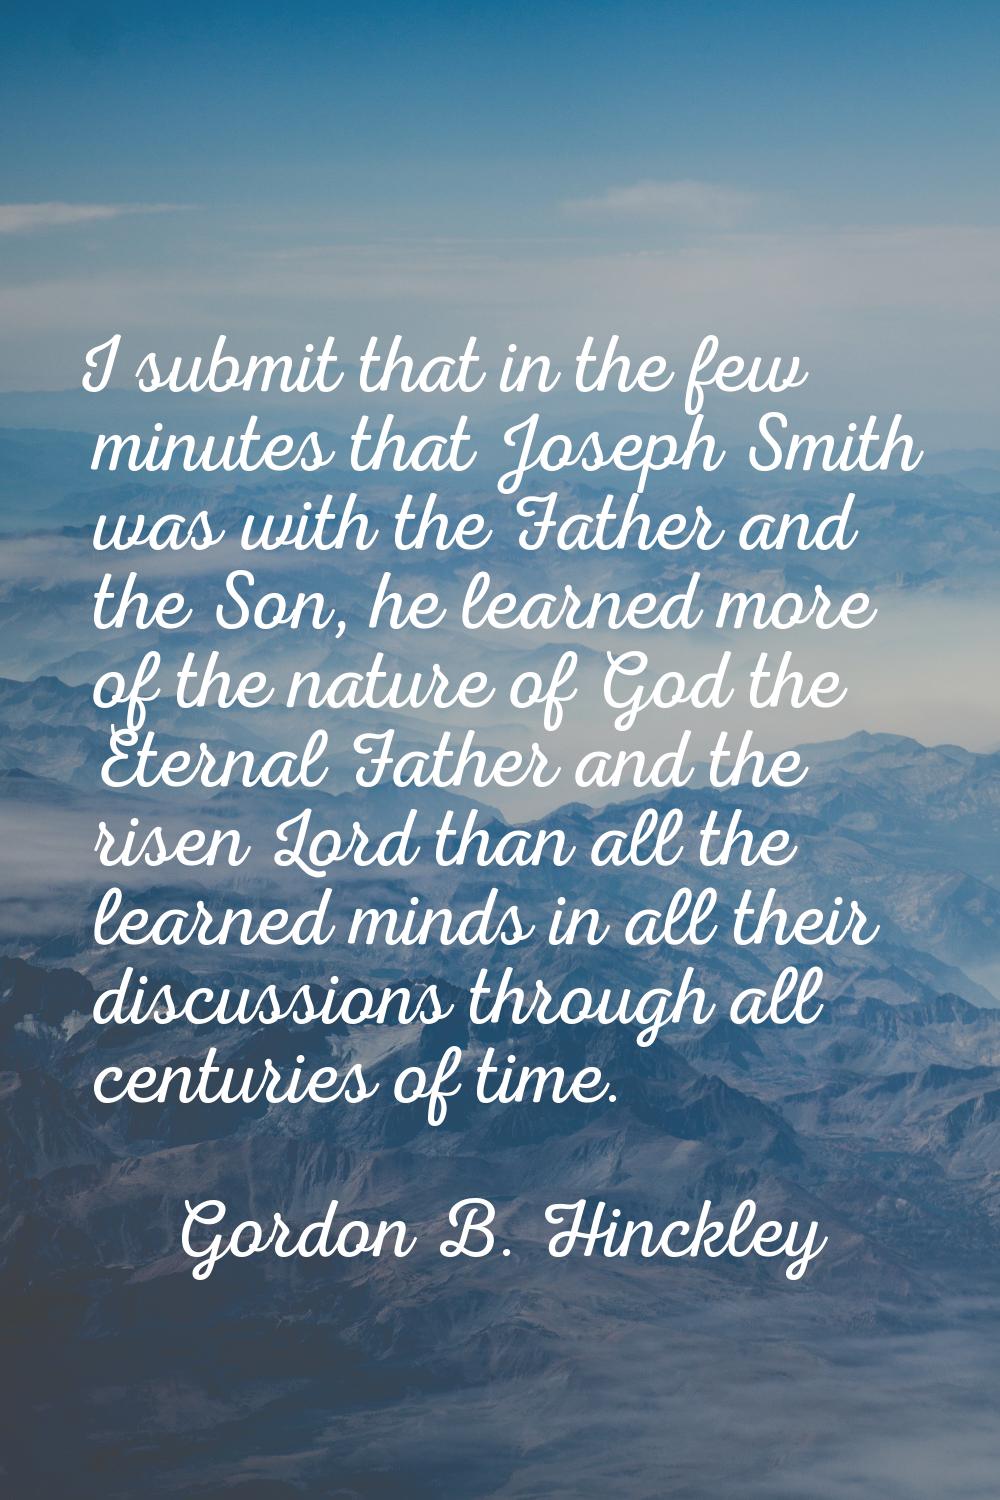 I submit that in the few minutes that Joseph Smith was with the Father and the Son, he learned more